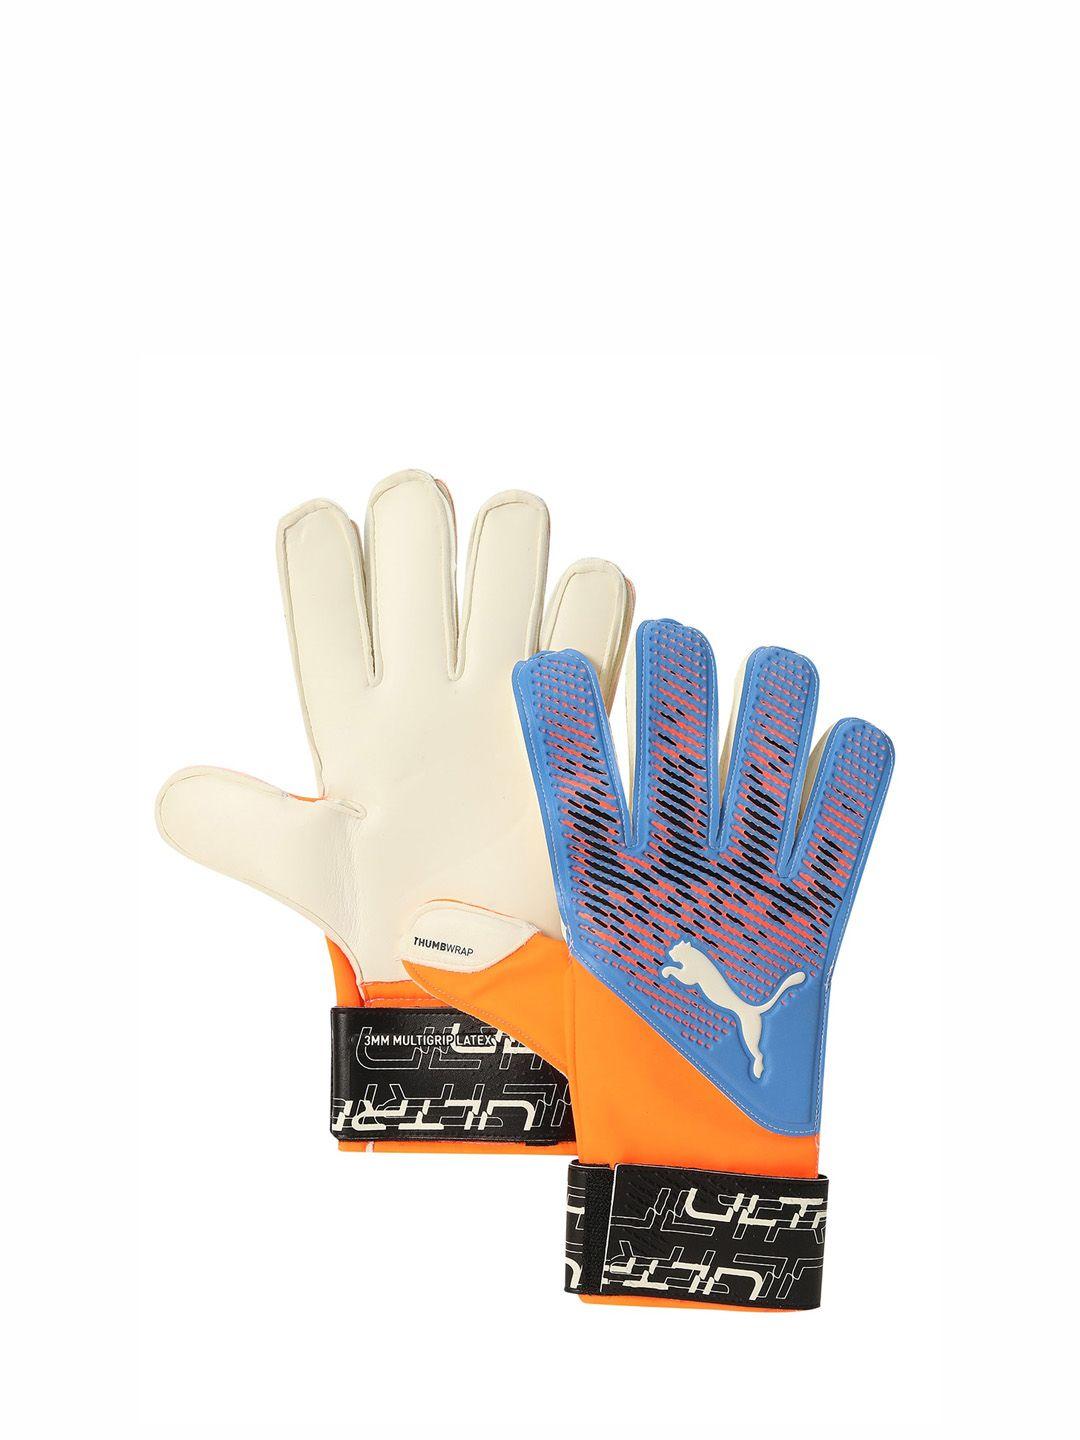 puma-ultra-grip-3-rc-patterned-sports-gloves